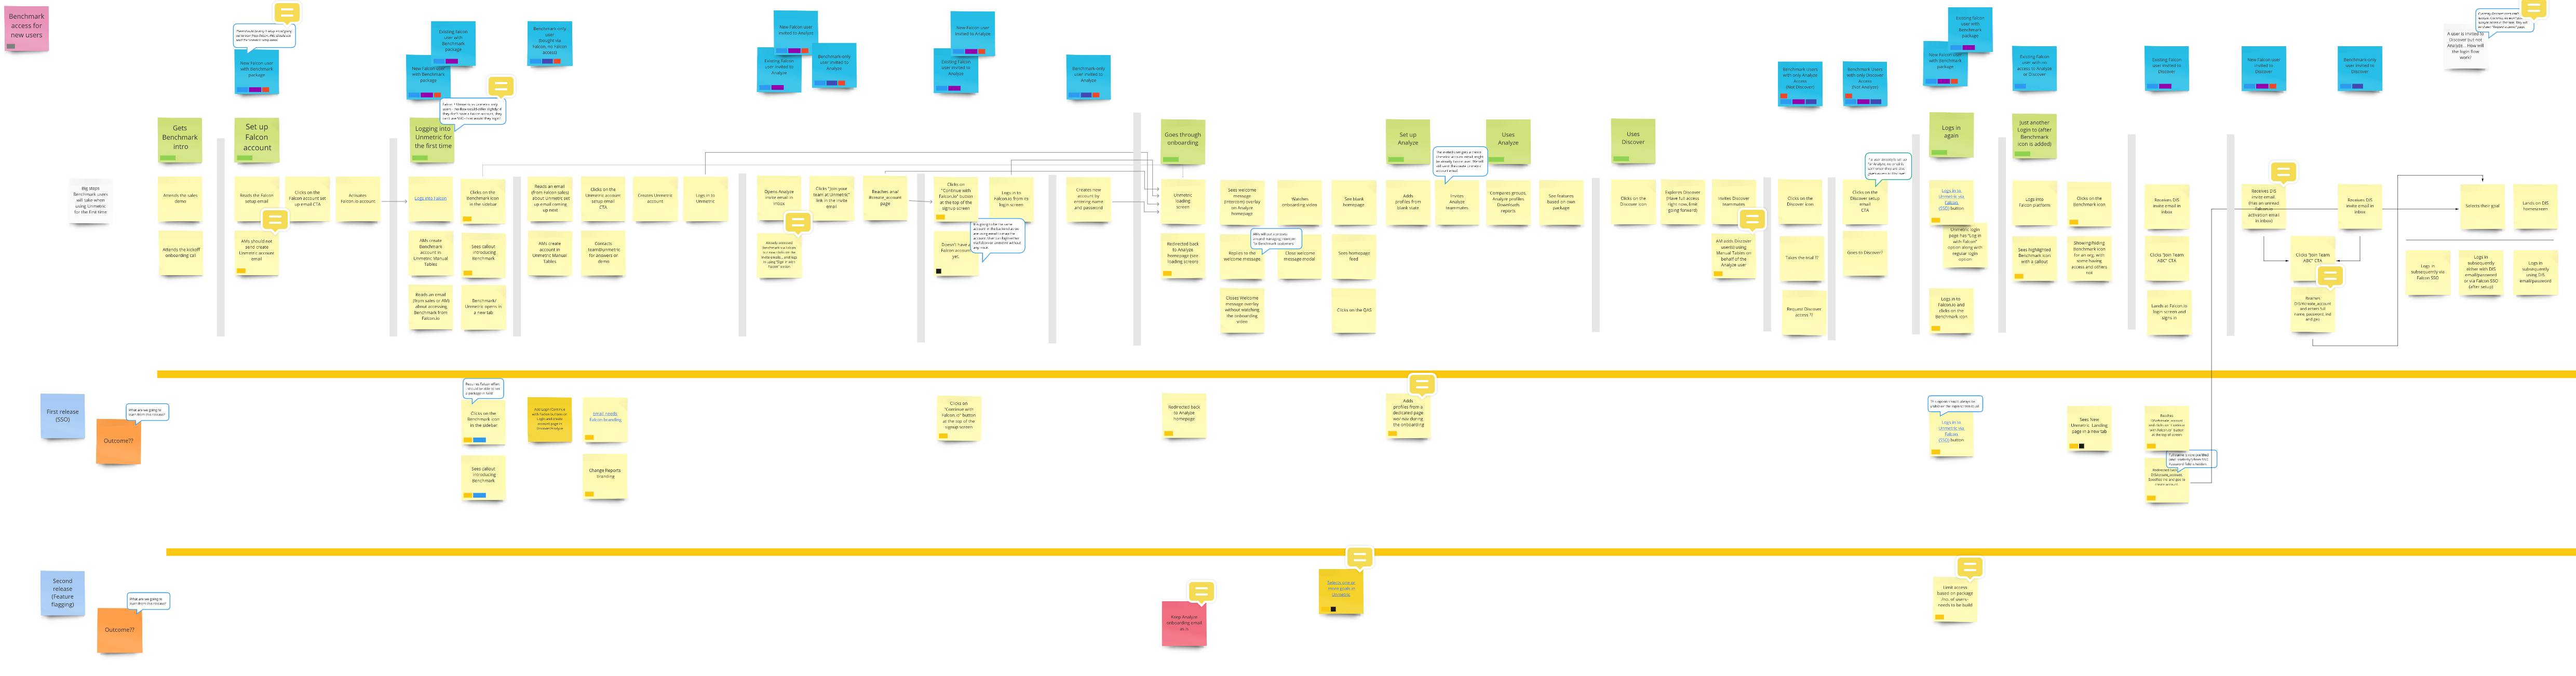 User story map